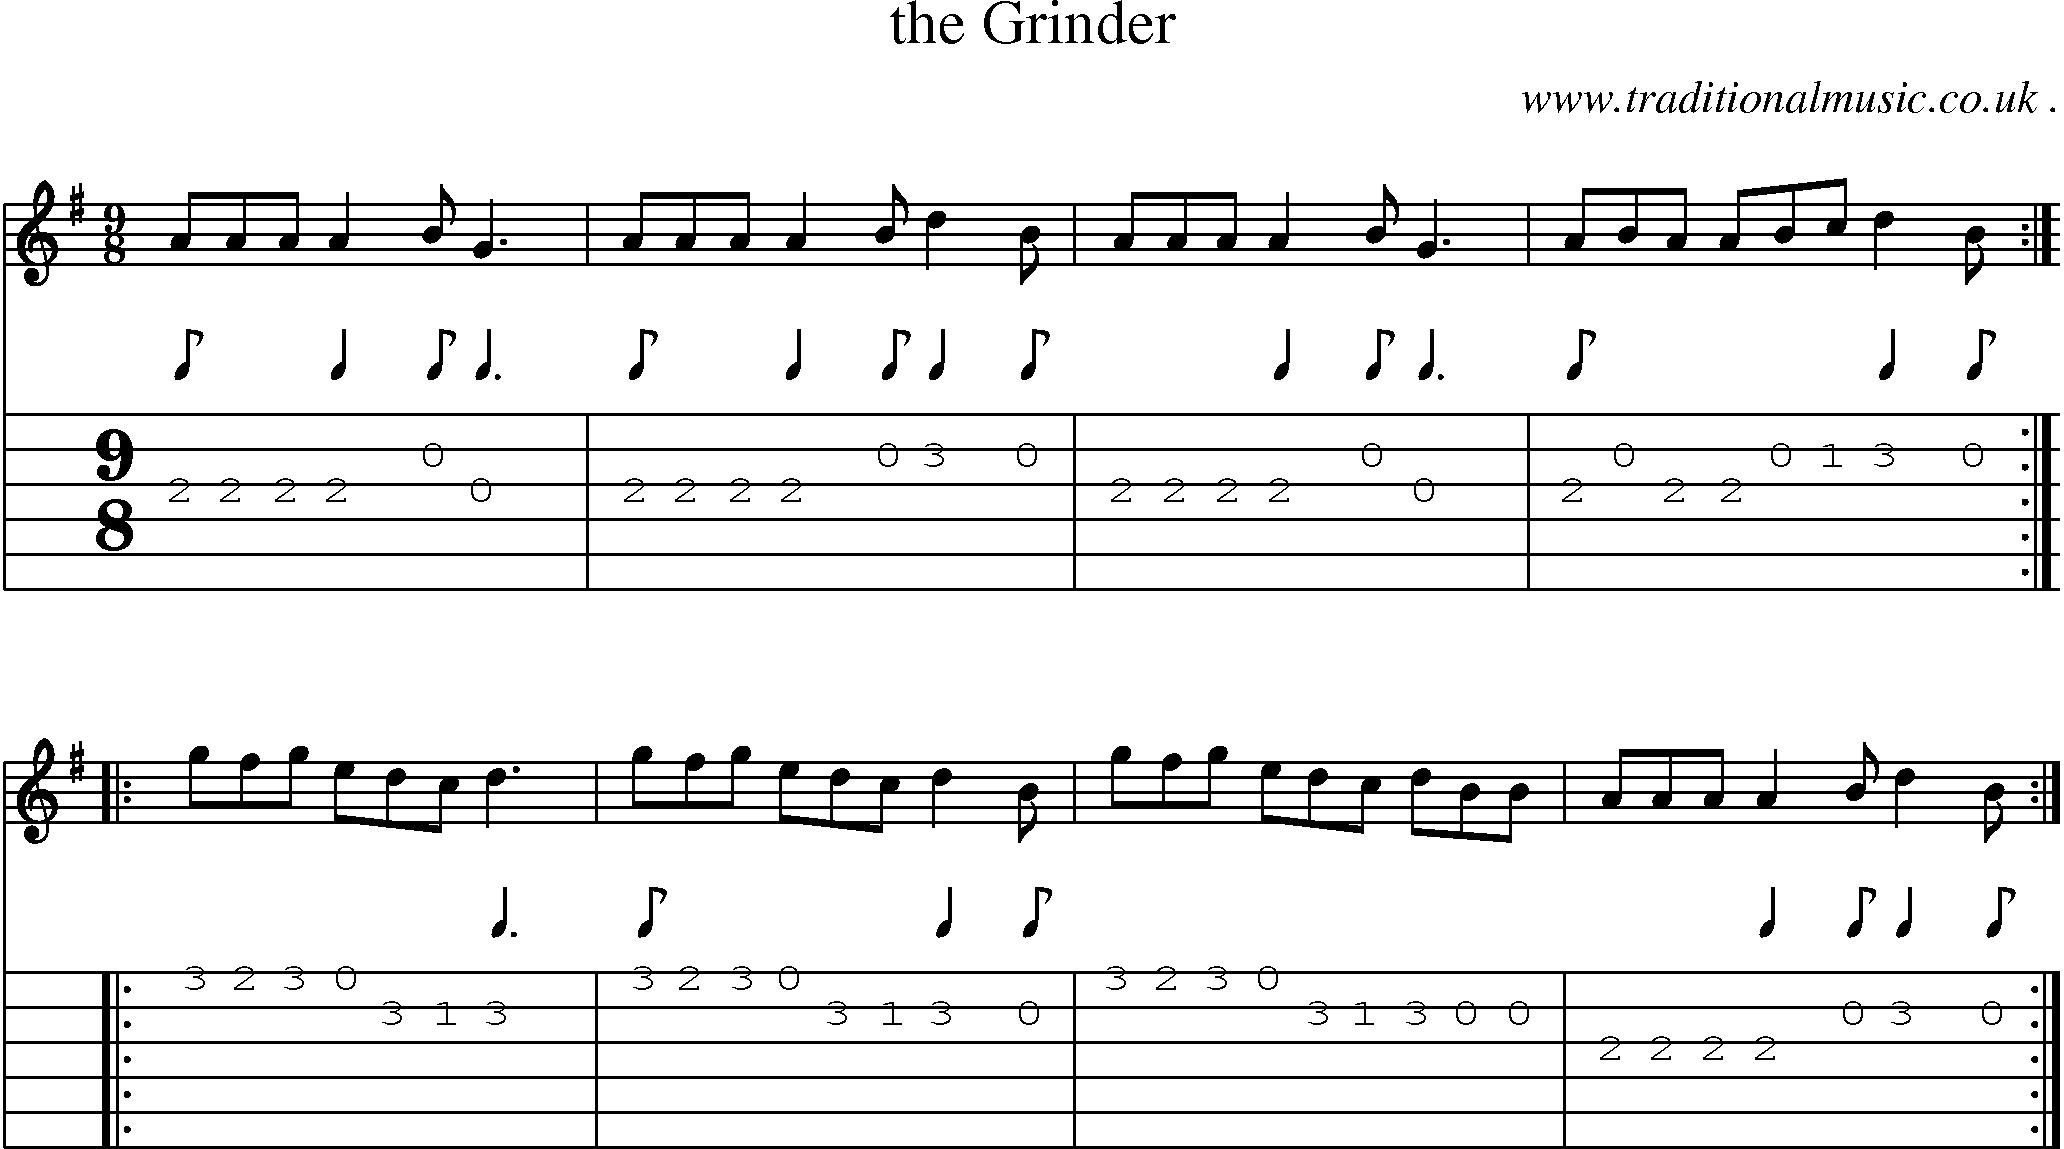 Sheet-Music and Guitar Tabs for The Grinder